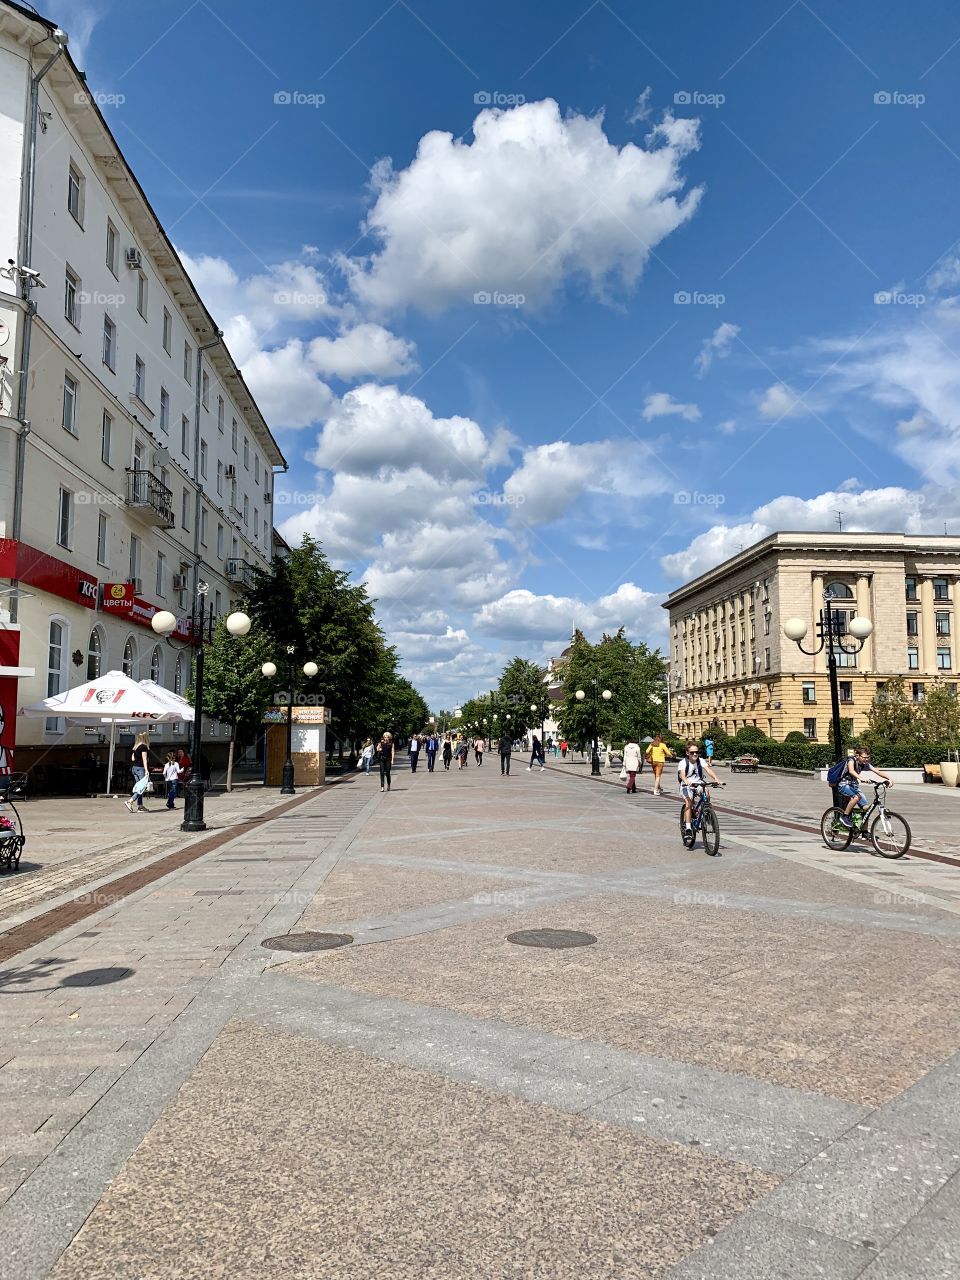 City street on a summer day. There are white clouds in the sky. people walk and ride bicycles